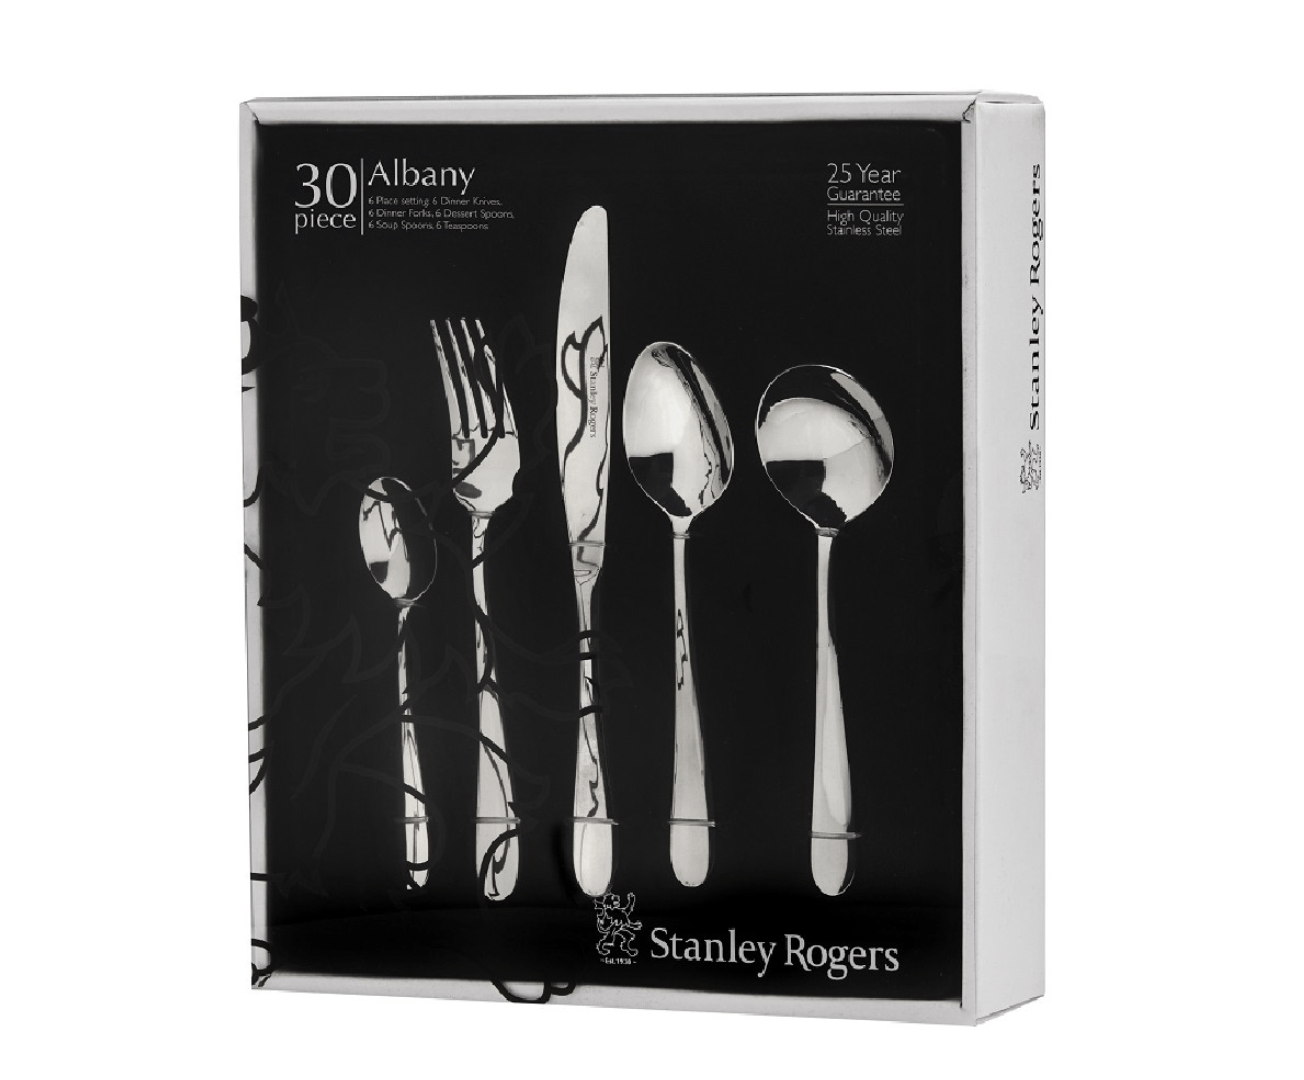 Stanley Rogers Albany 30 Piece Cutlery Gift Boxed Set